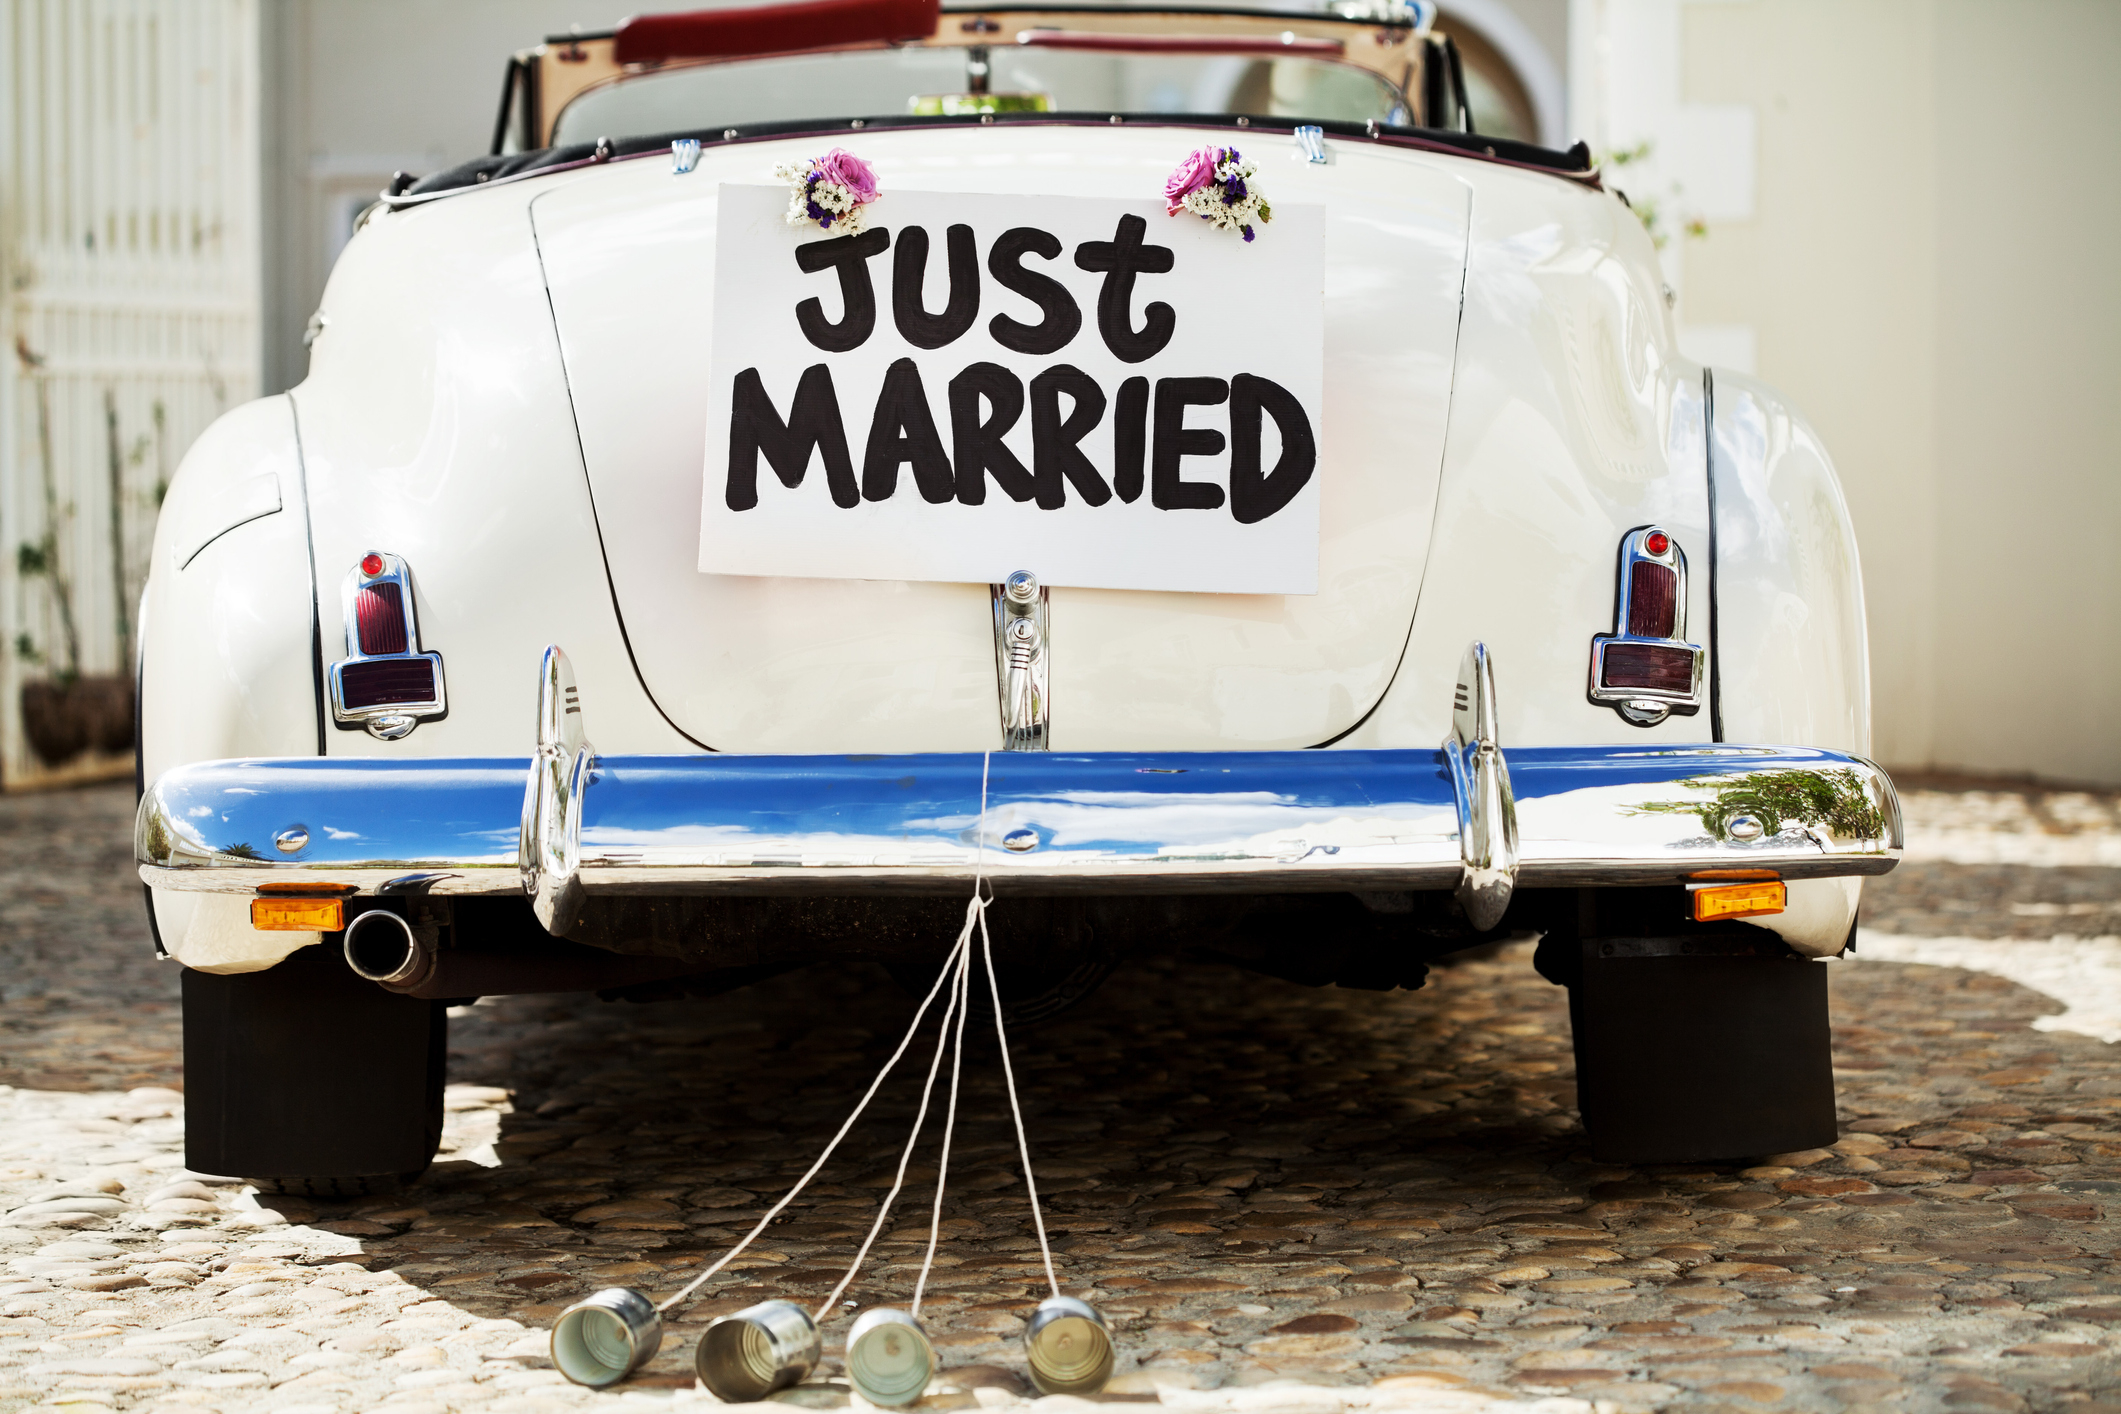 A car with a just married sign